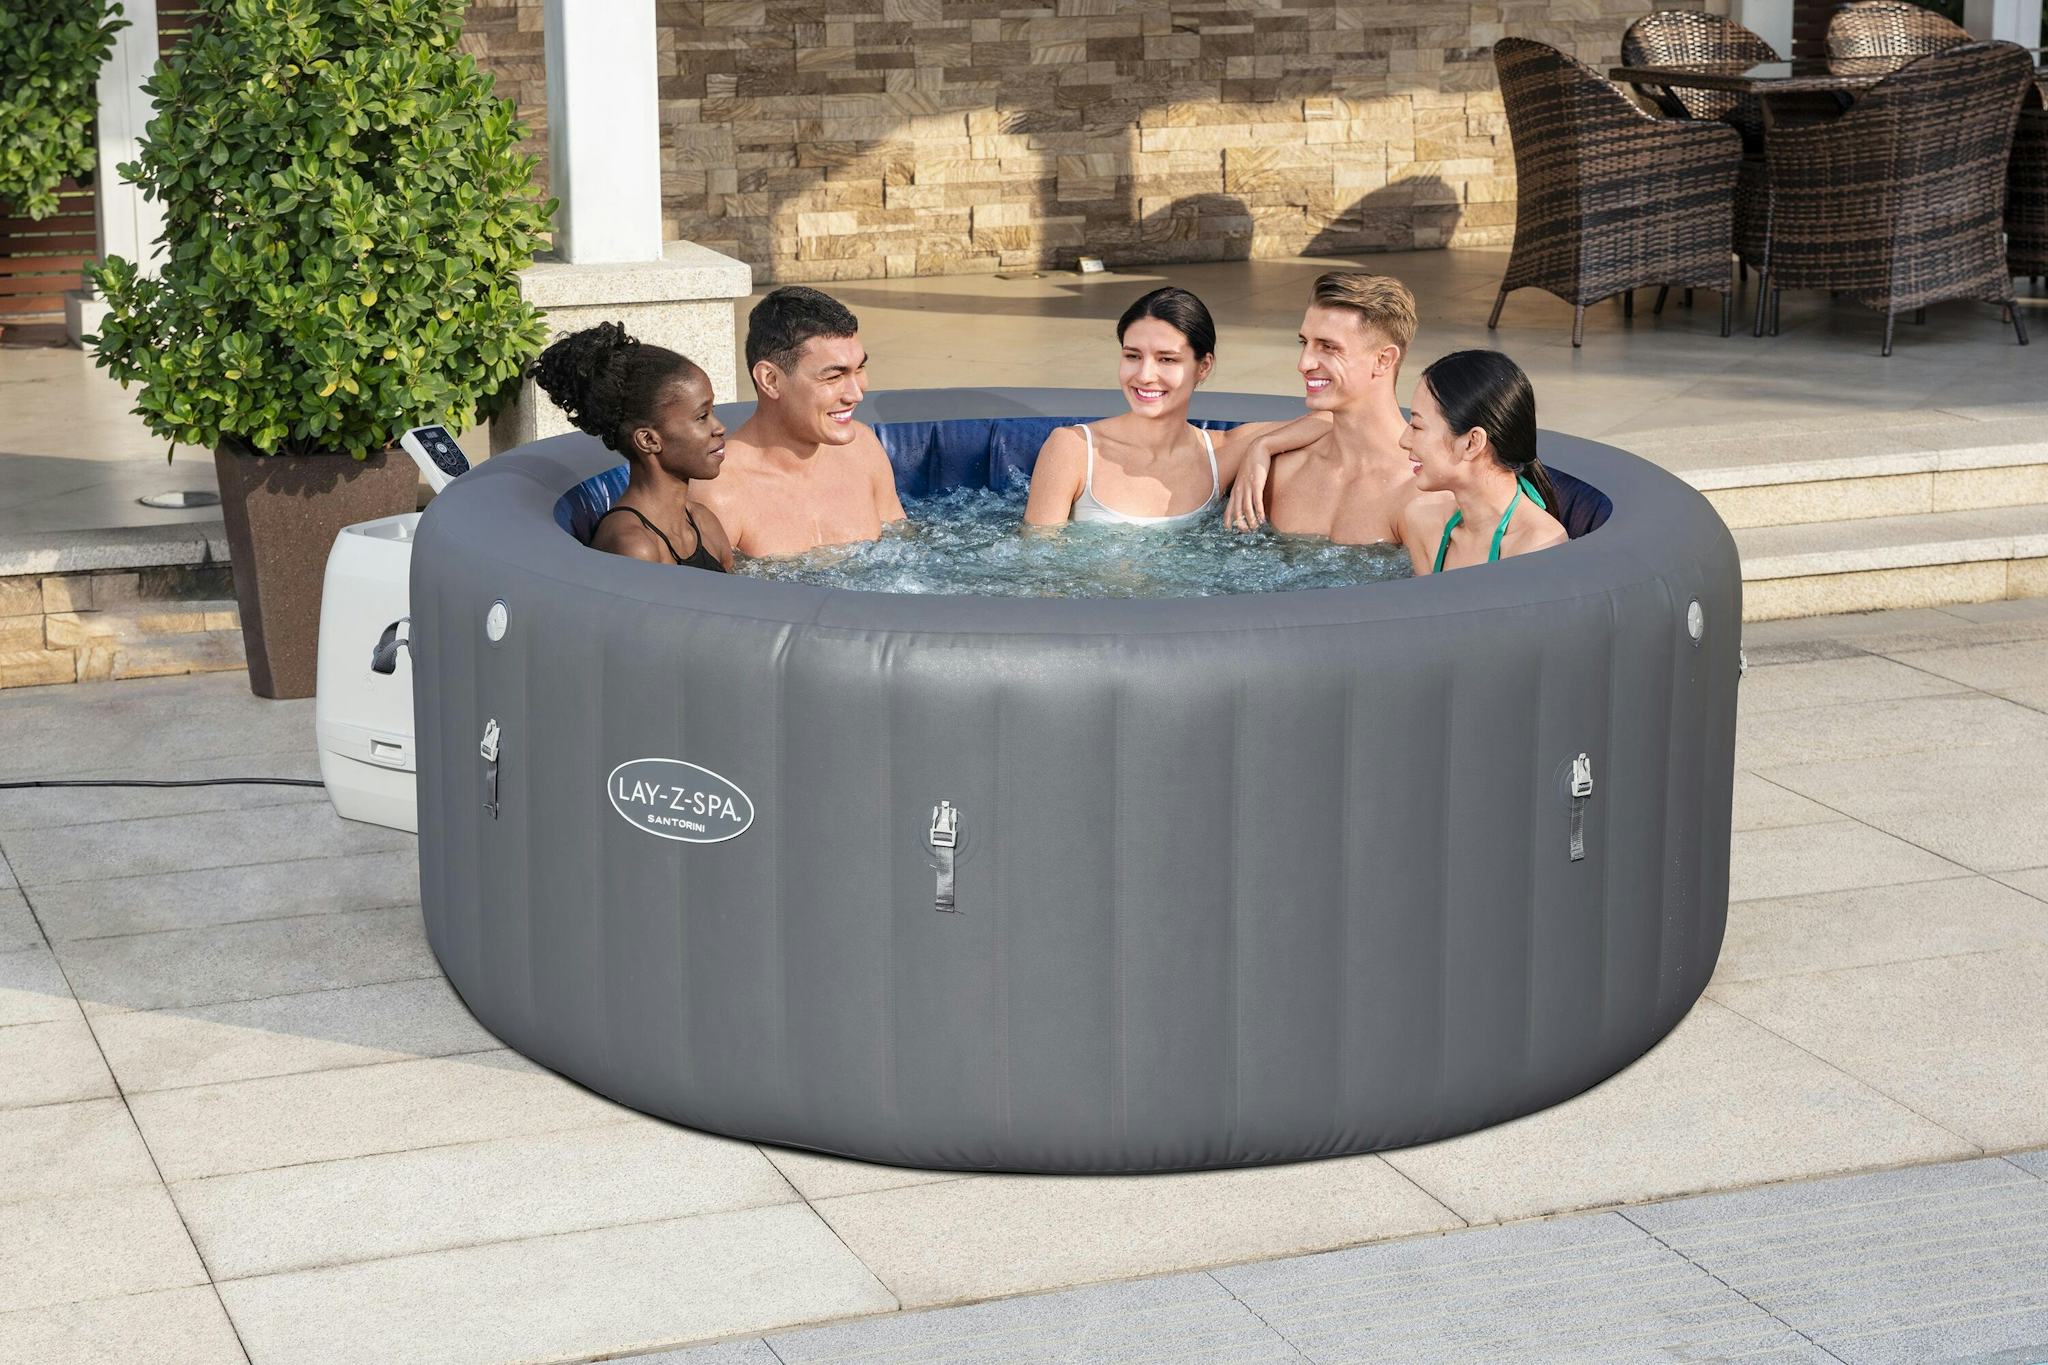 Spas Gonflables Spa gonflable rond Lay-Z-Spa Santorini Hydrojet pro™ 5 - 7 personnes Bestway 3